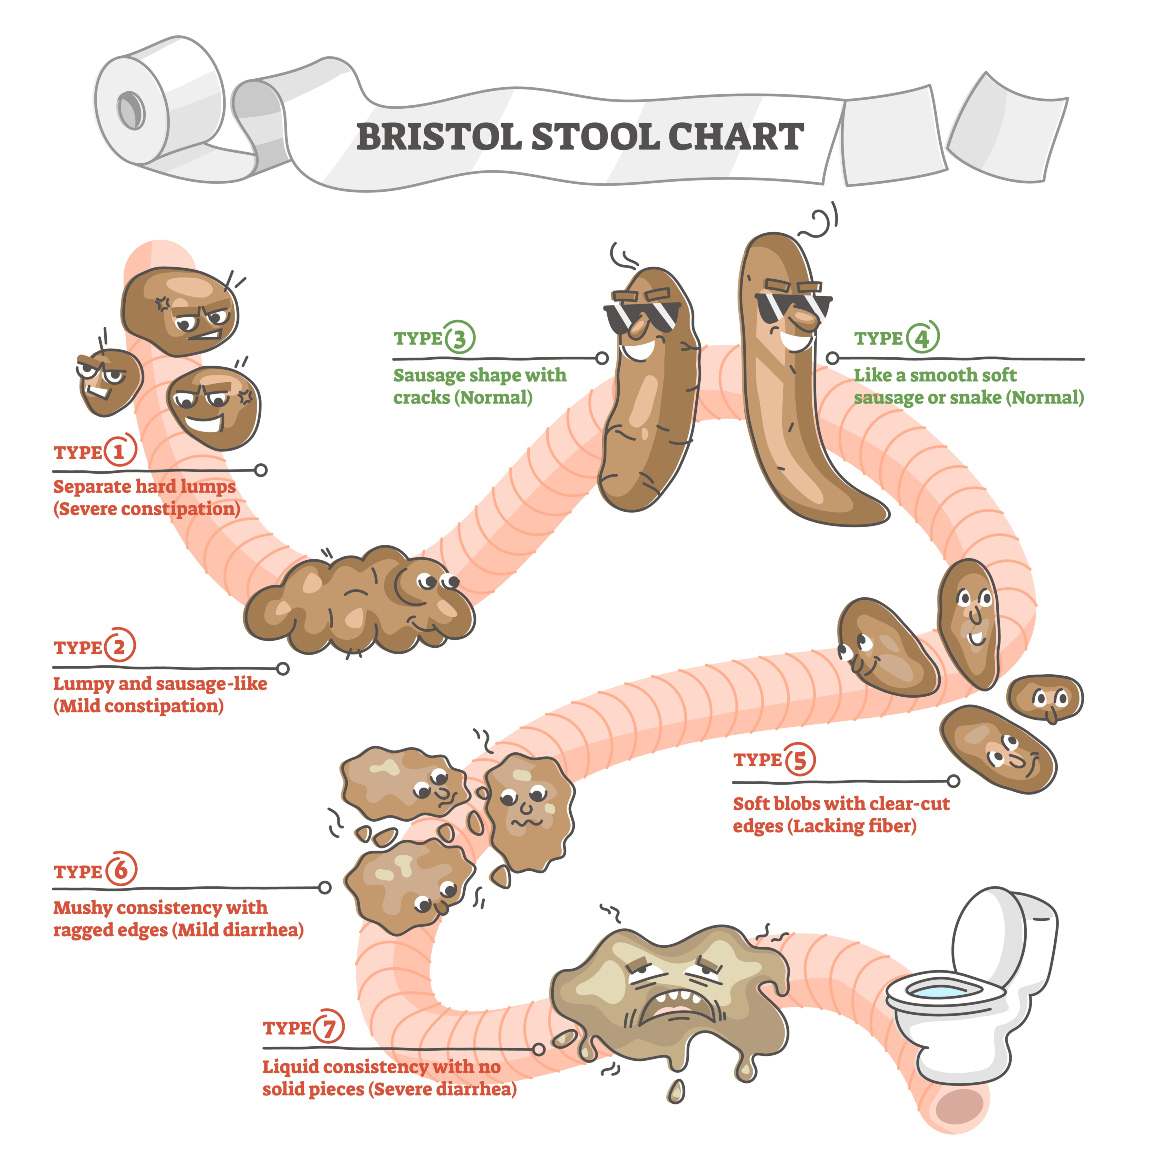 The Bristol Stool Form Scale and Your Health